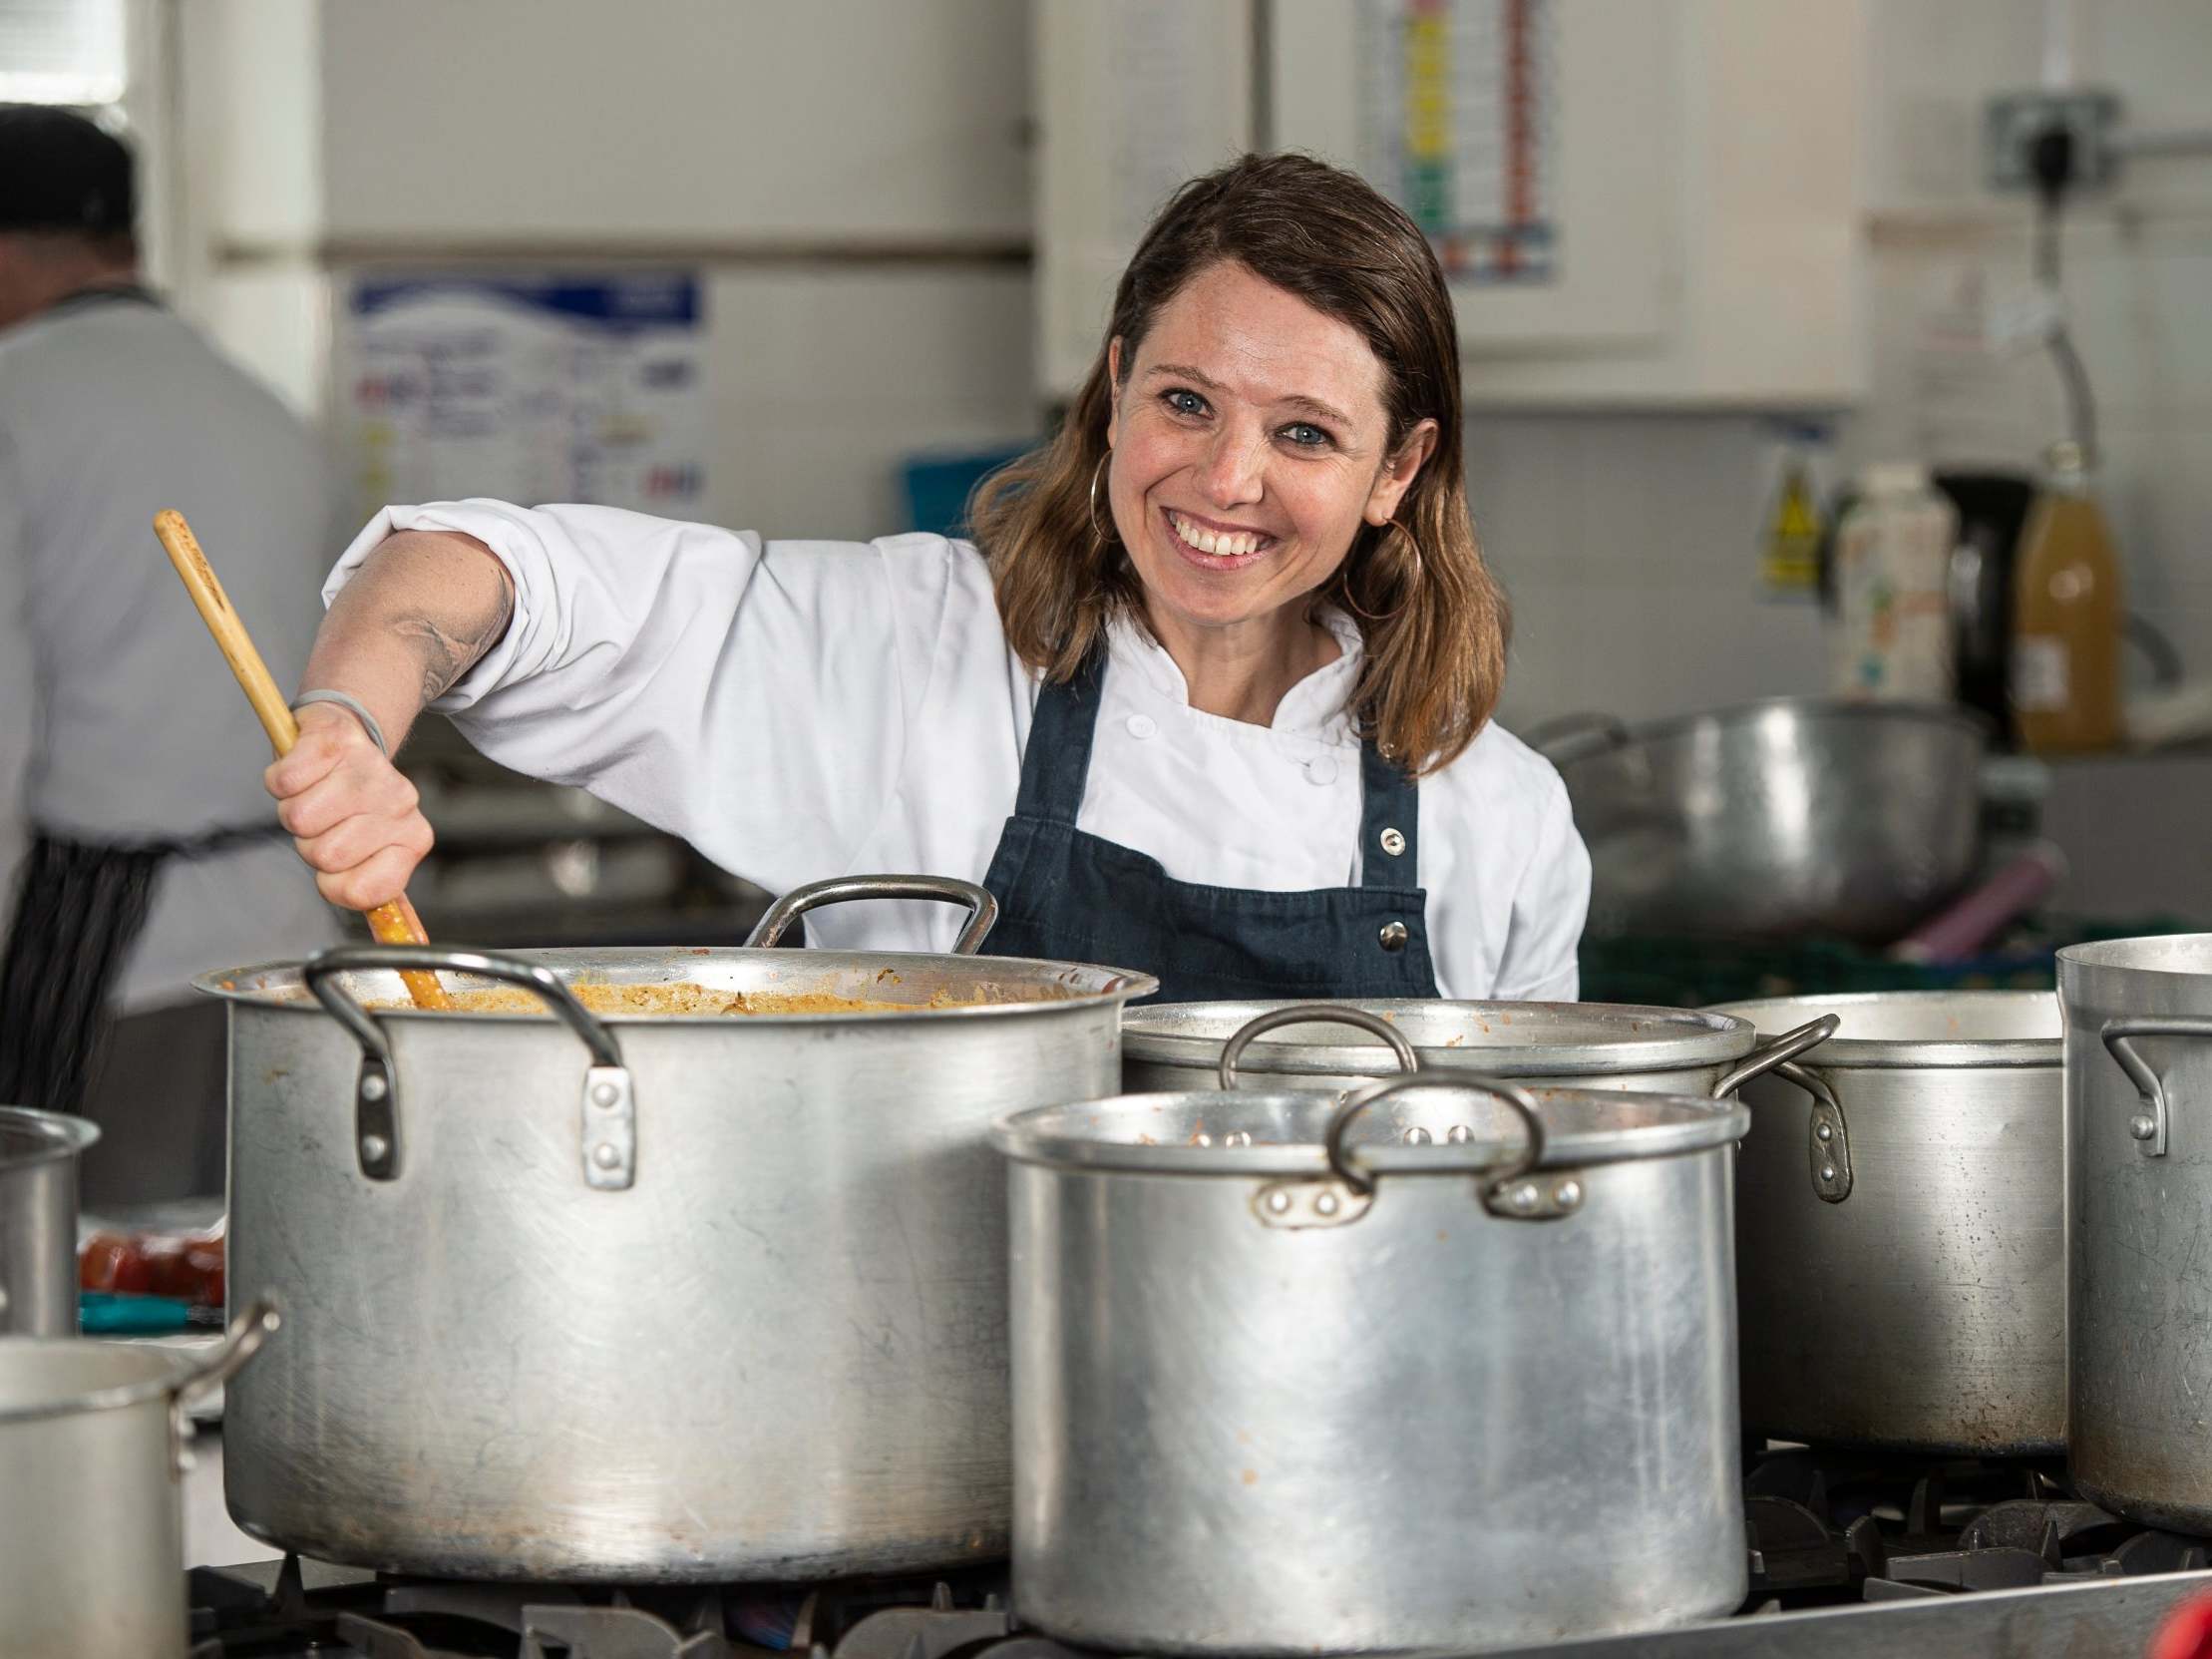 Chefs in Schools co-founder Nicole Pisani stirs up a free meal at Grasmere Primary School, Stoke Newington, north London